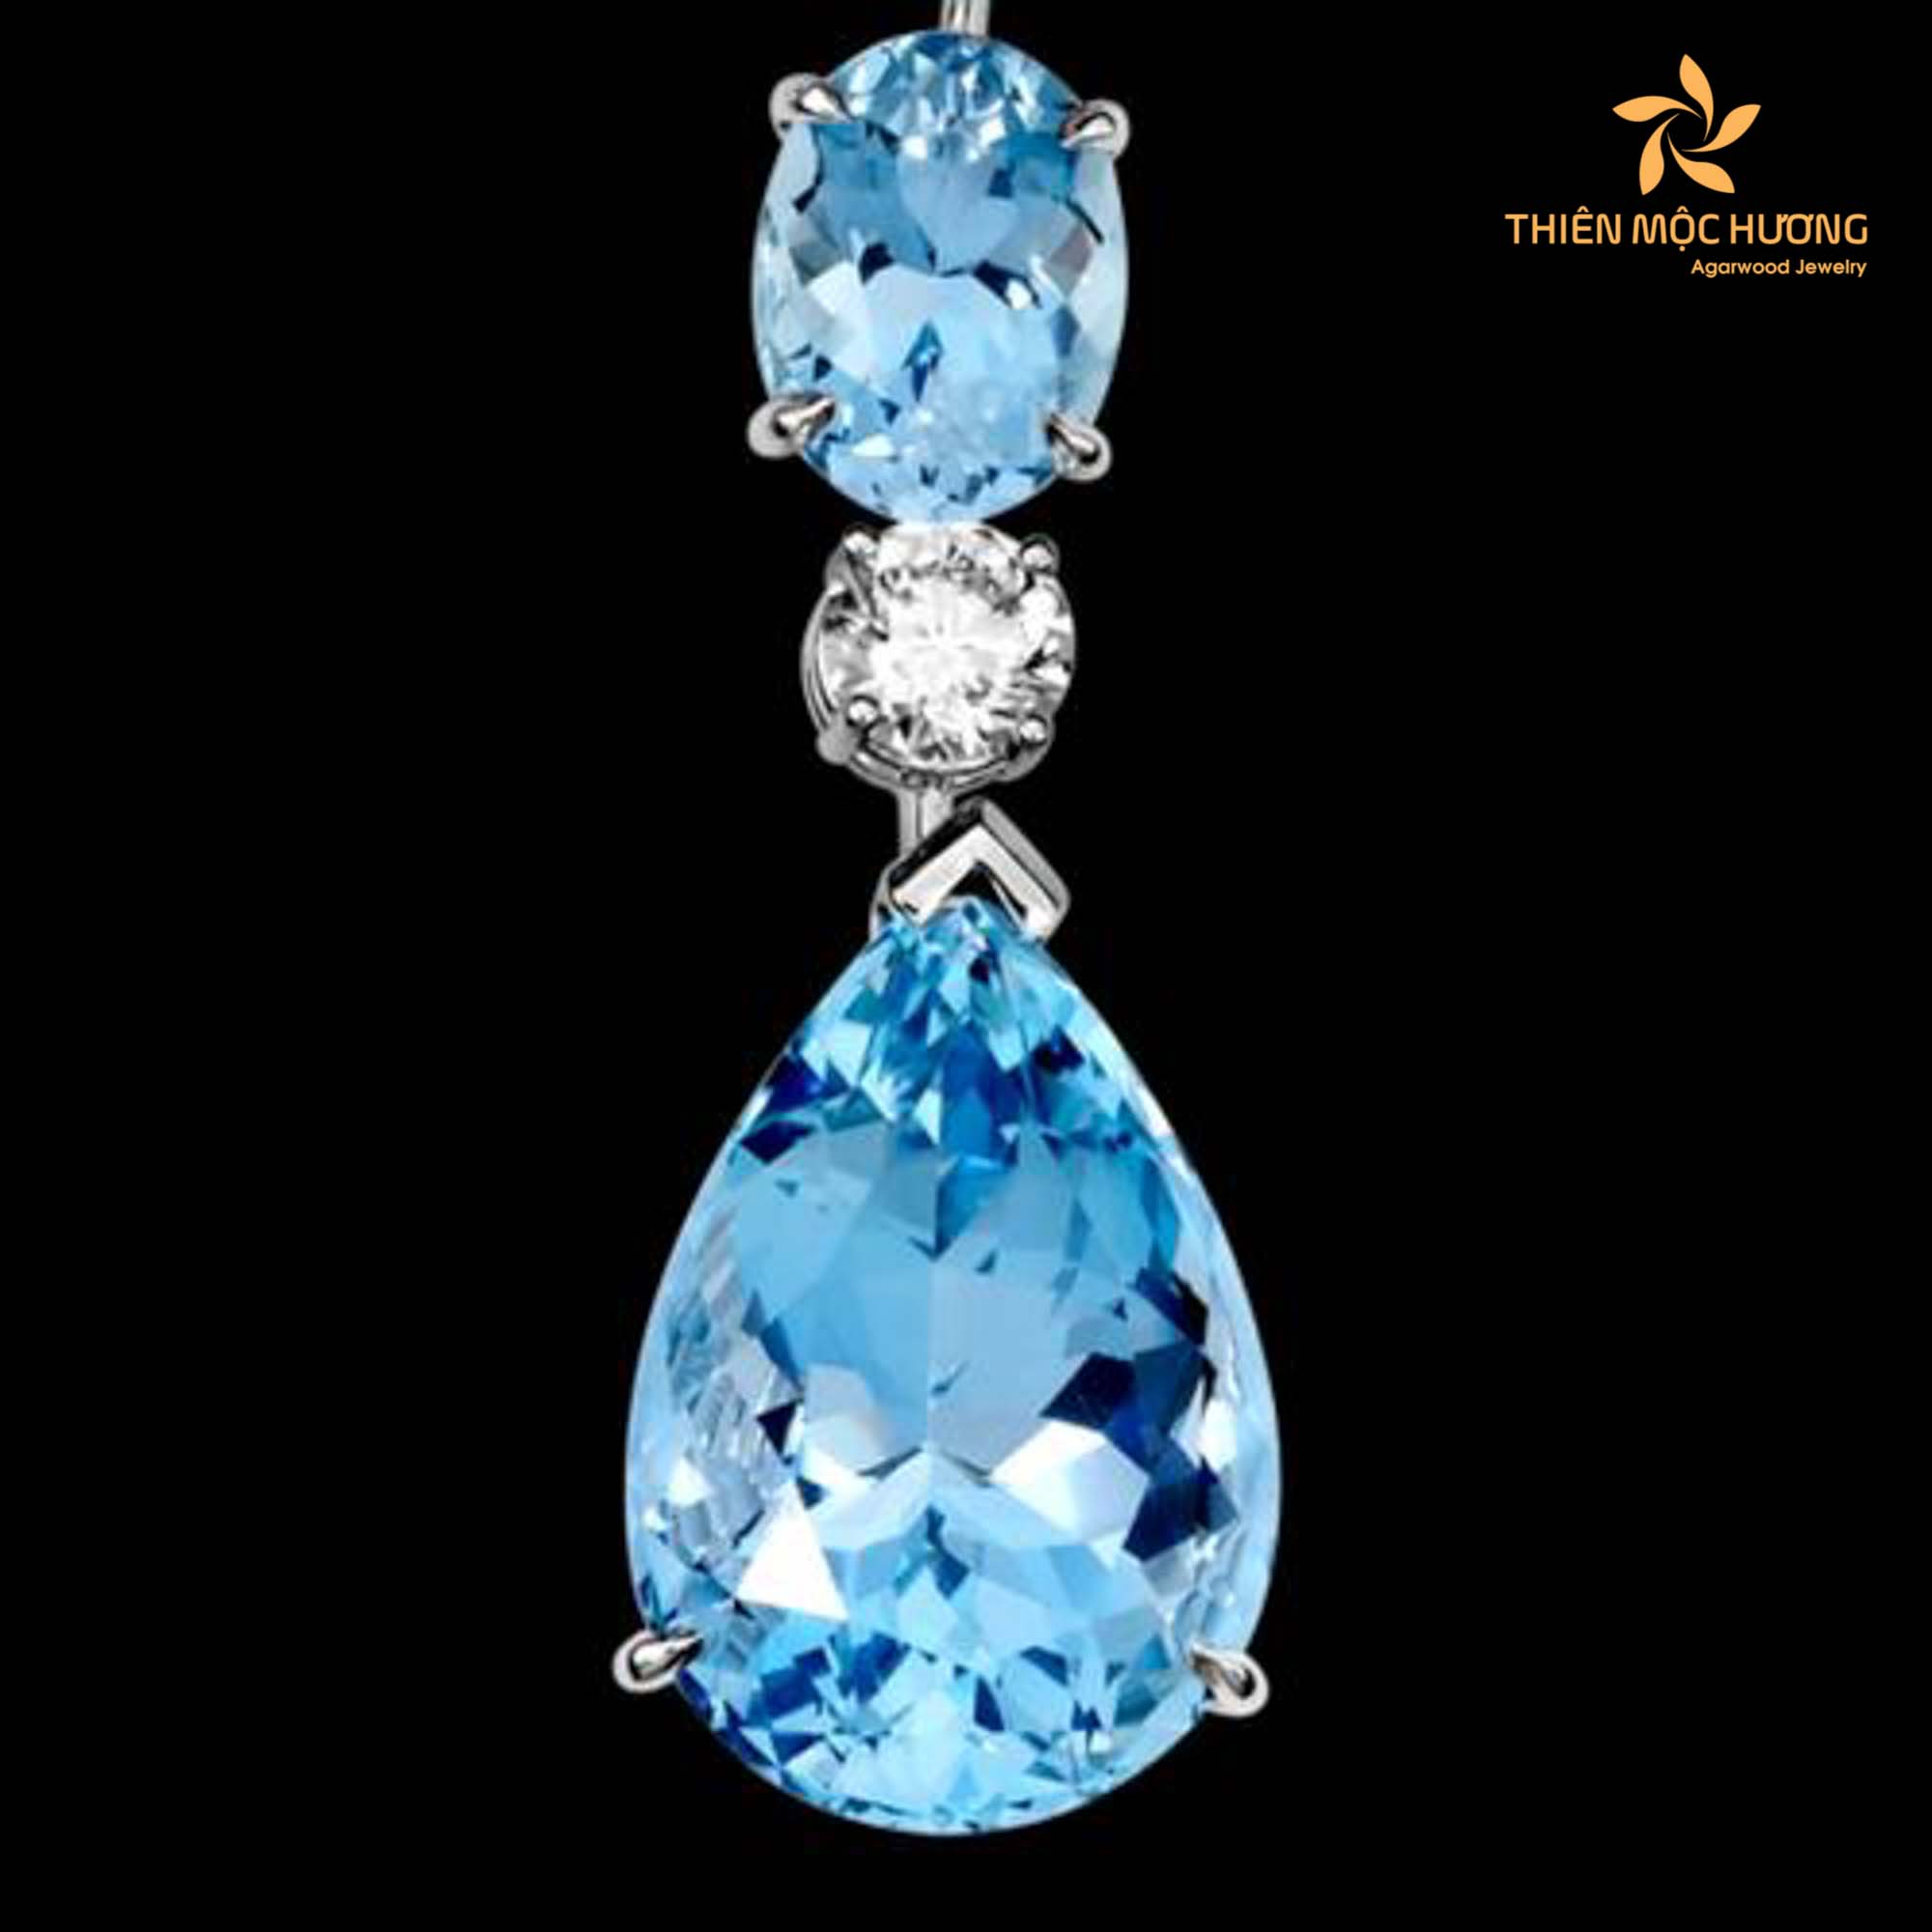 The demand for aquamarine has been steadily increasing over the years